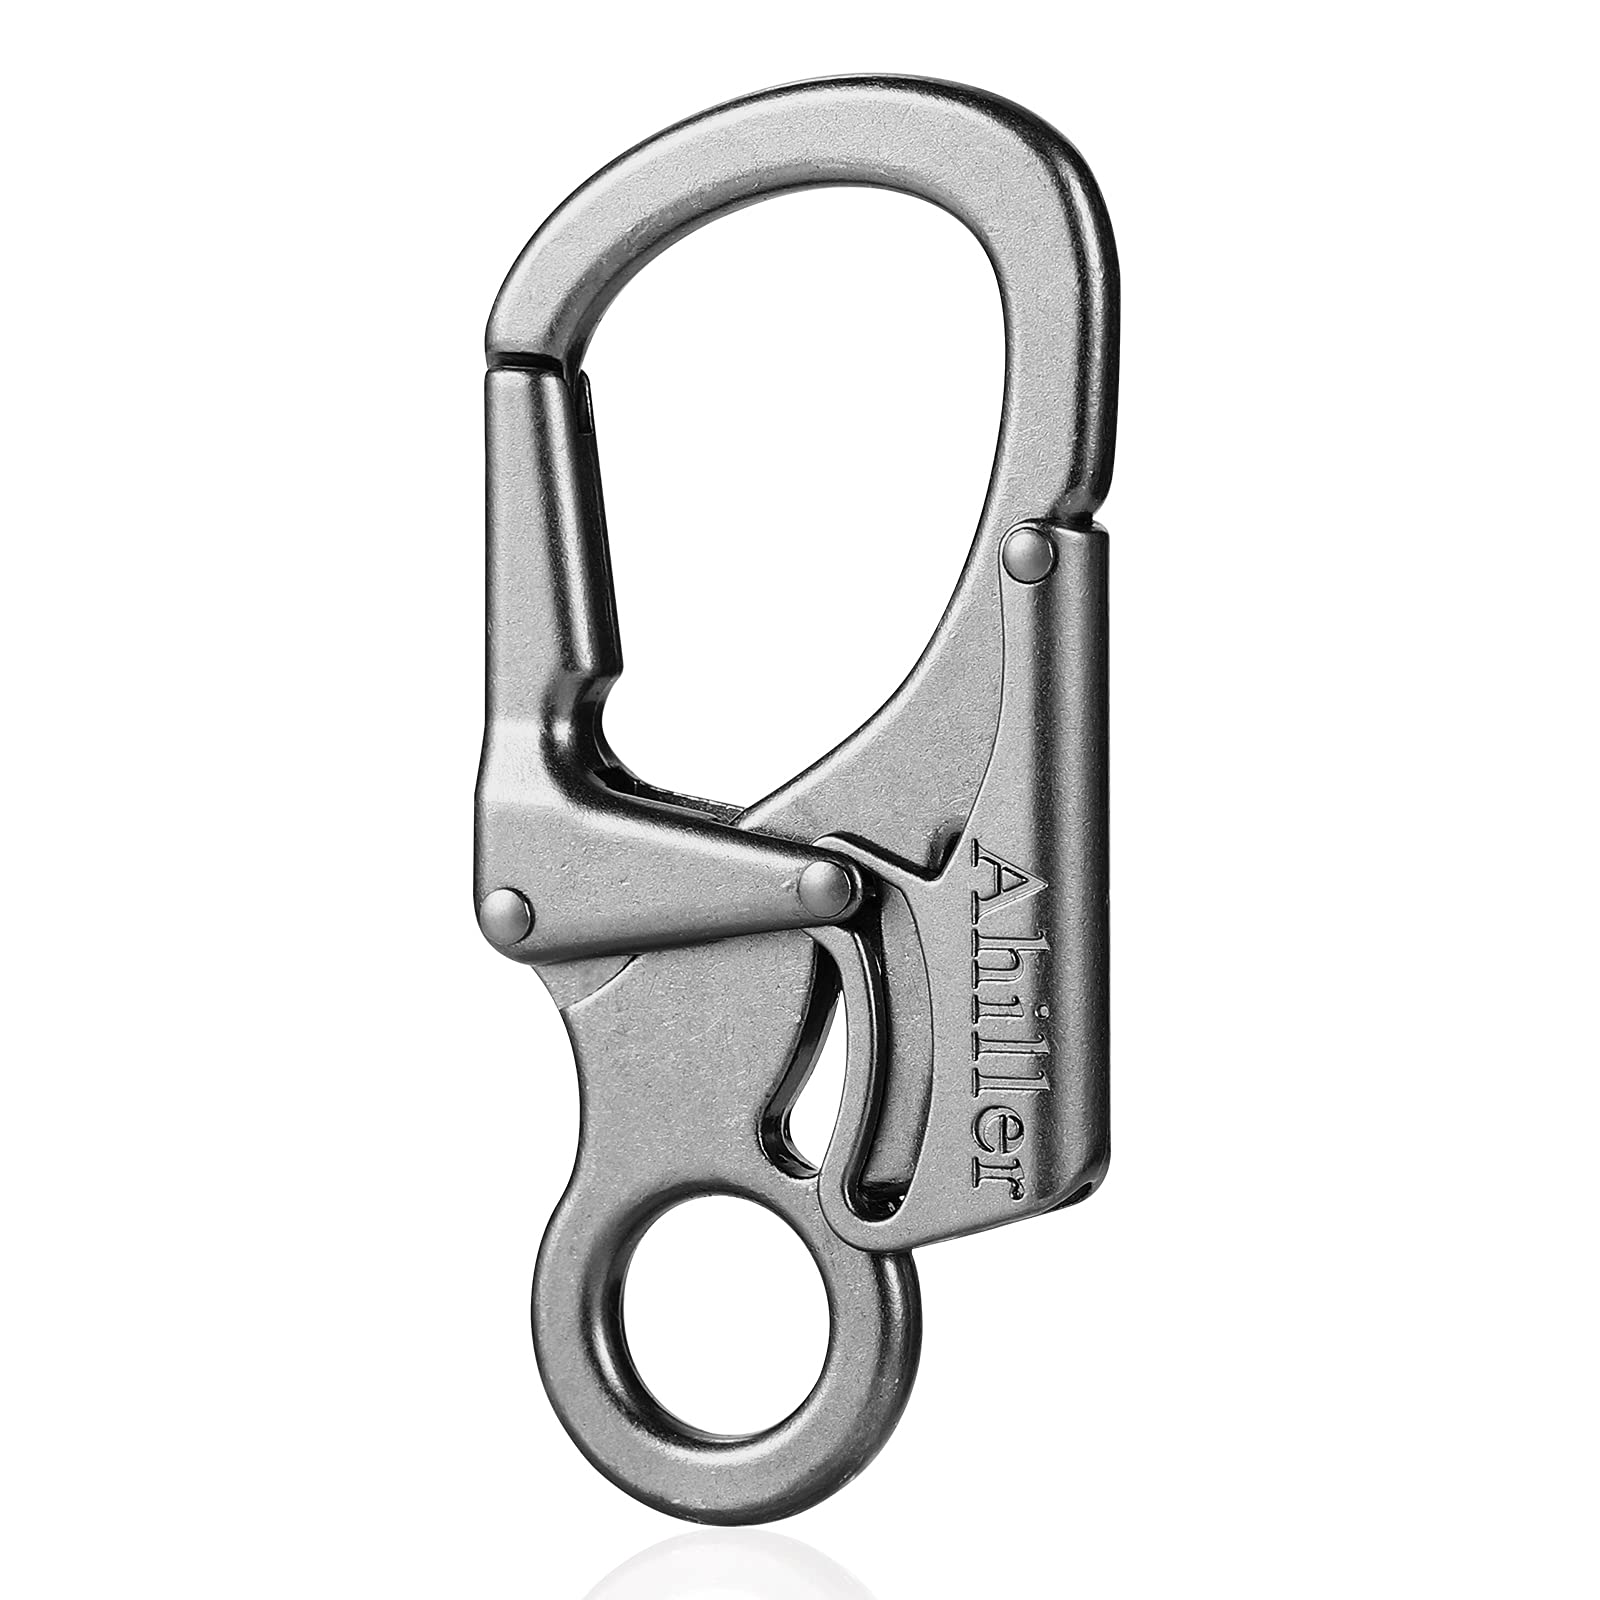 Carabiner Clip, Double Anti-Misopening Locking Design, 2.95'' in Alloy  Carabiner Keychain for Outdoor Camping